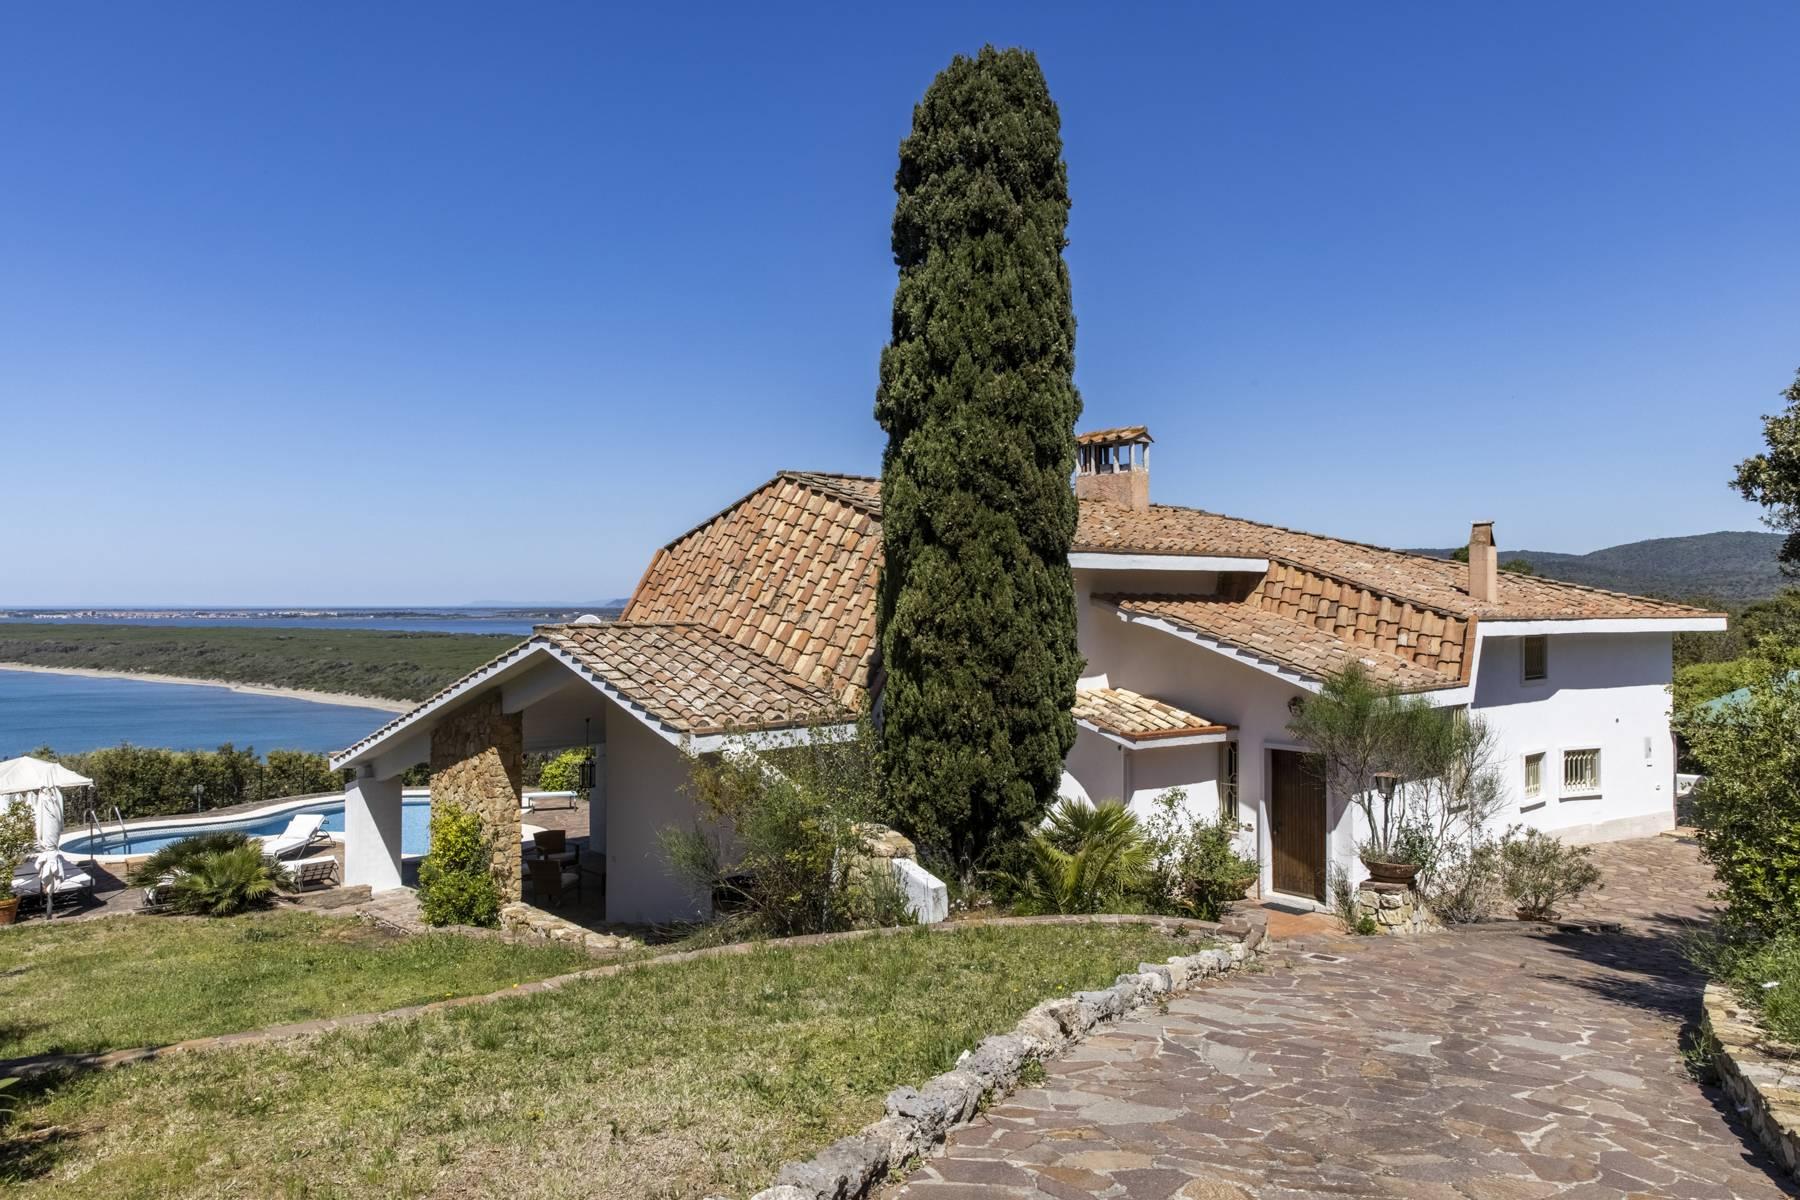 Stunning villa in Ansedonia with an incomparable view - 9